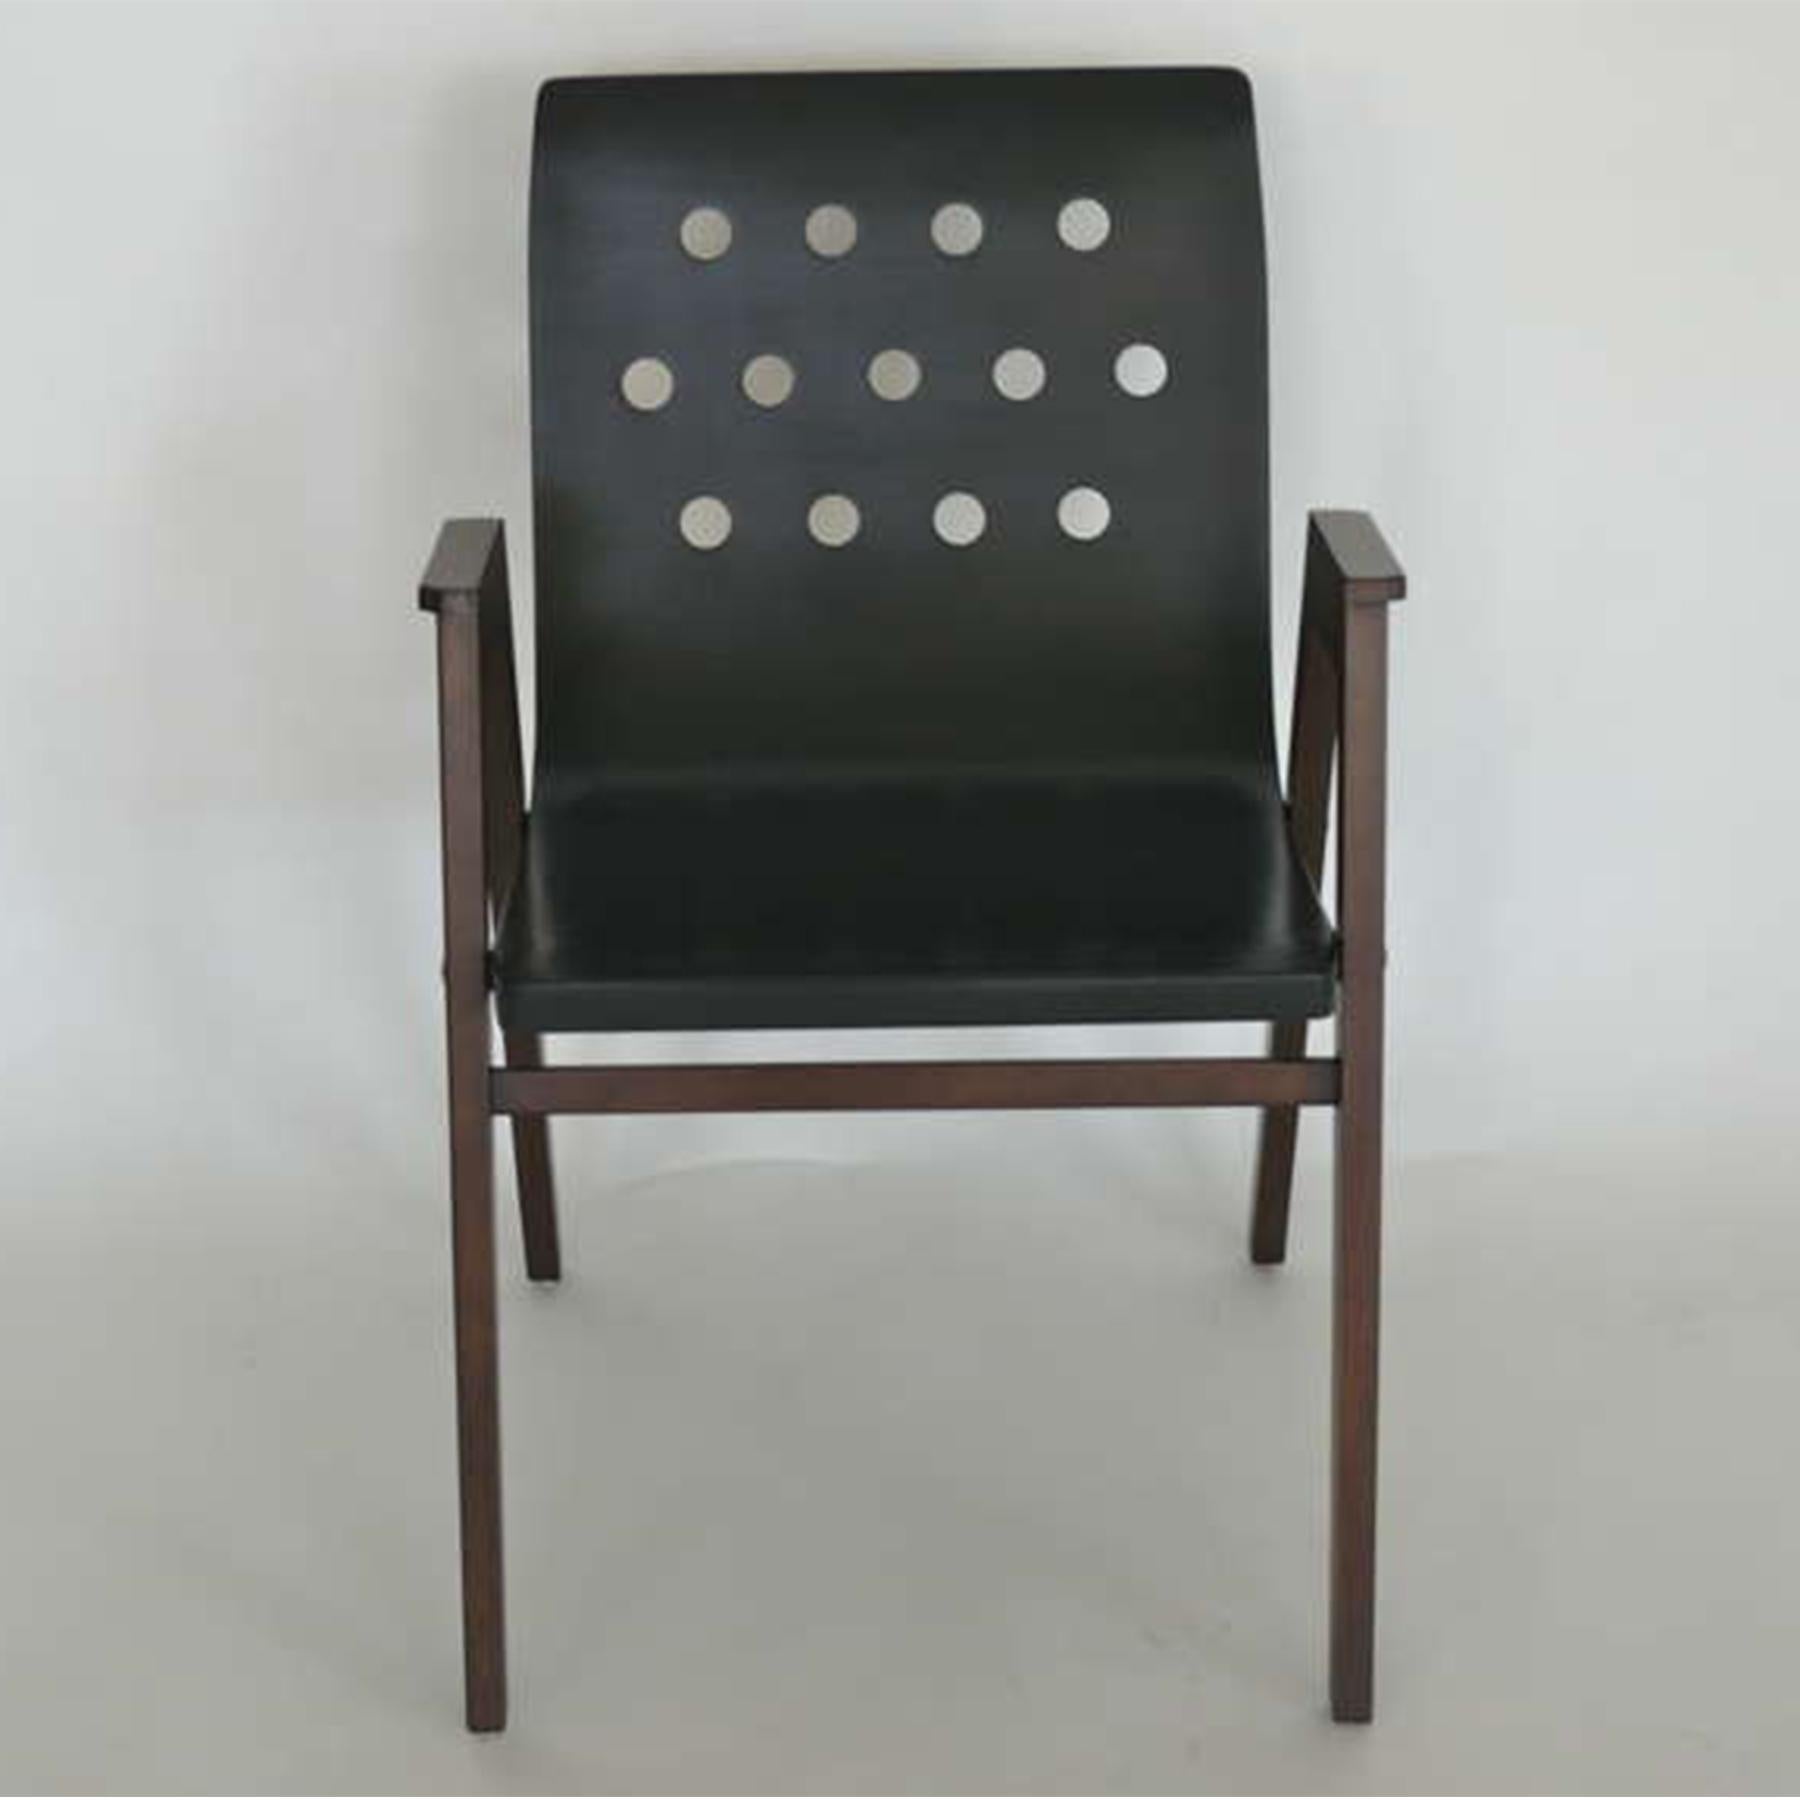 Fantastic set of six stackable armchairs designed by Roland Rainer. Originally designed for the Viennese Town Hall by A & E Pollak. Newly refinished beechwood angled arms and legs in a deep brown finish. Seats and perforated backrests are made of